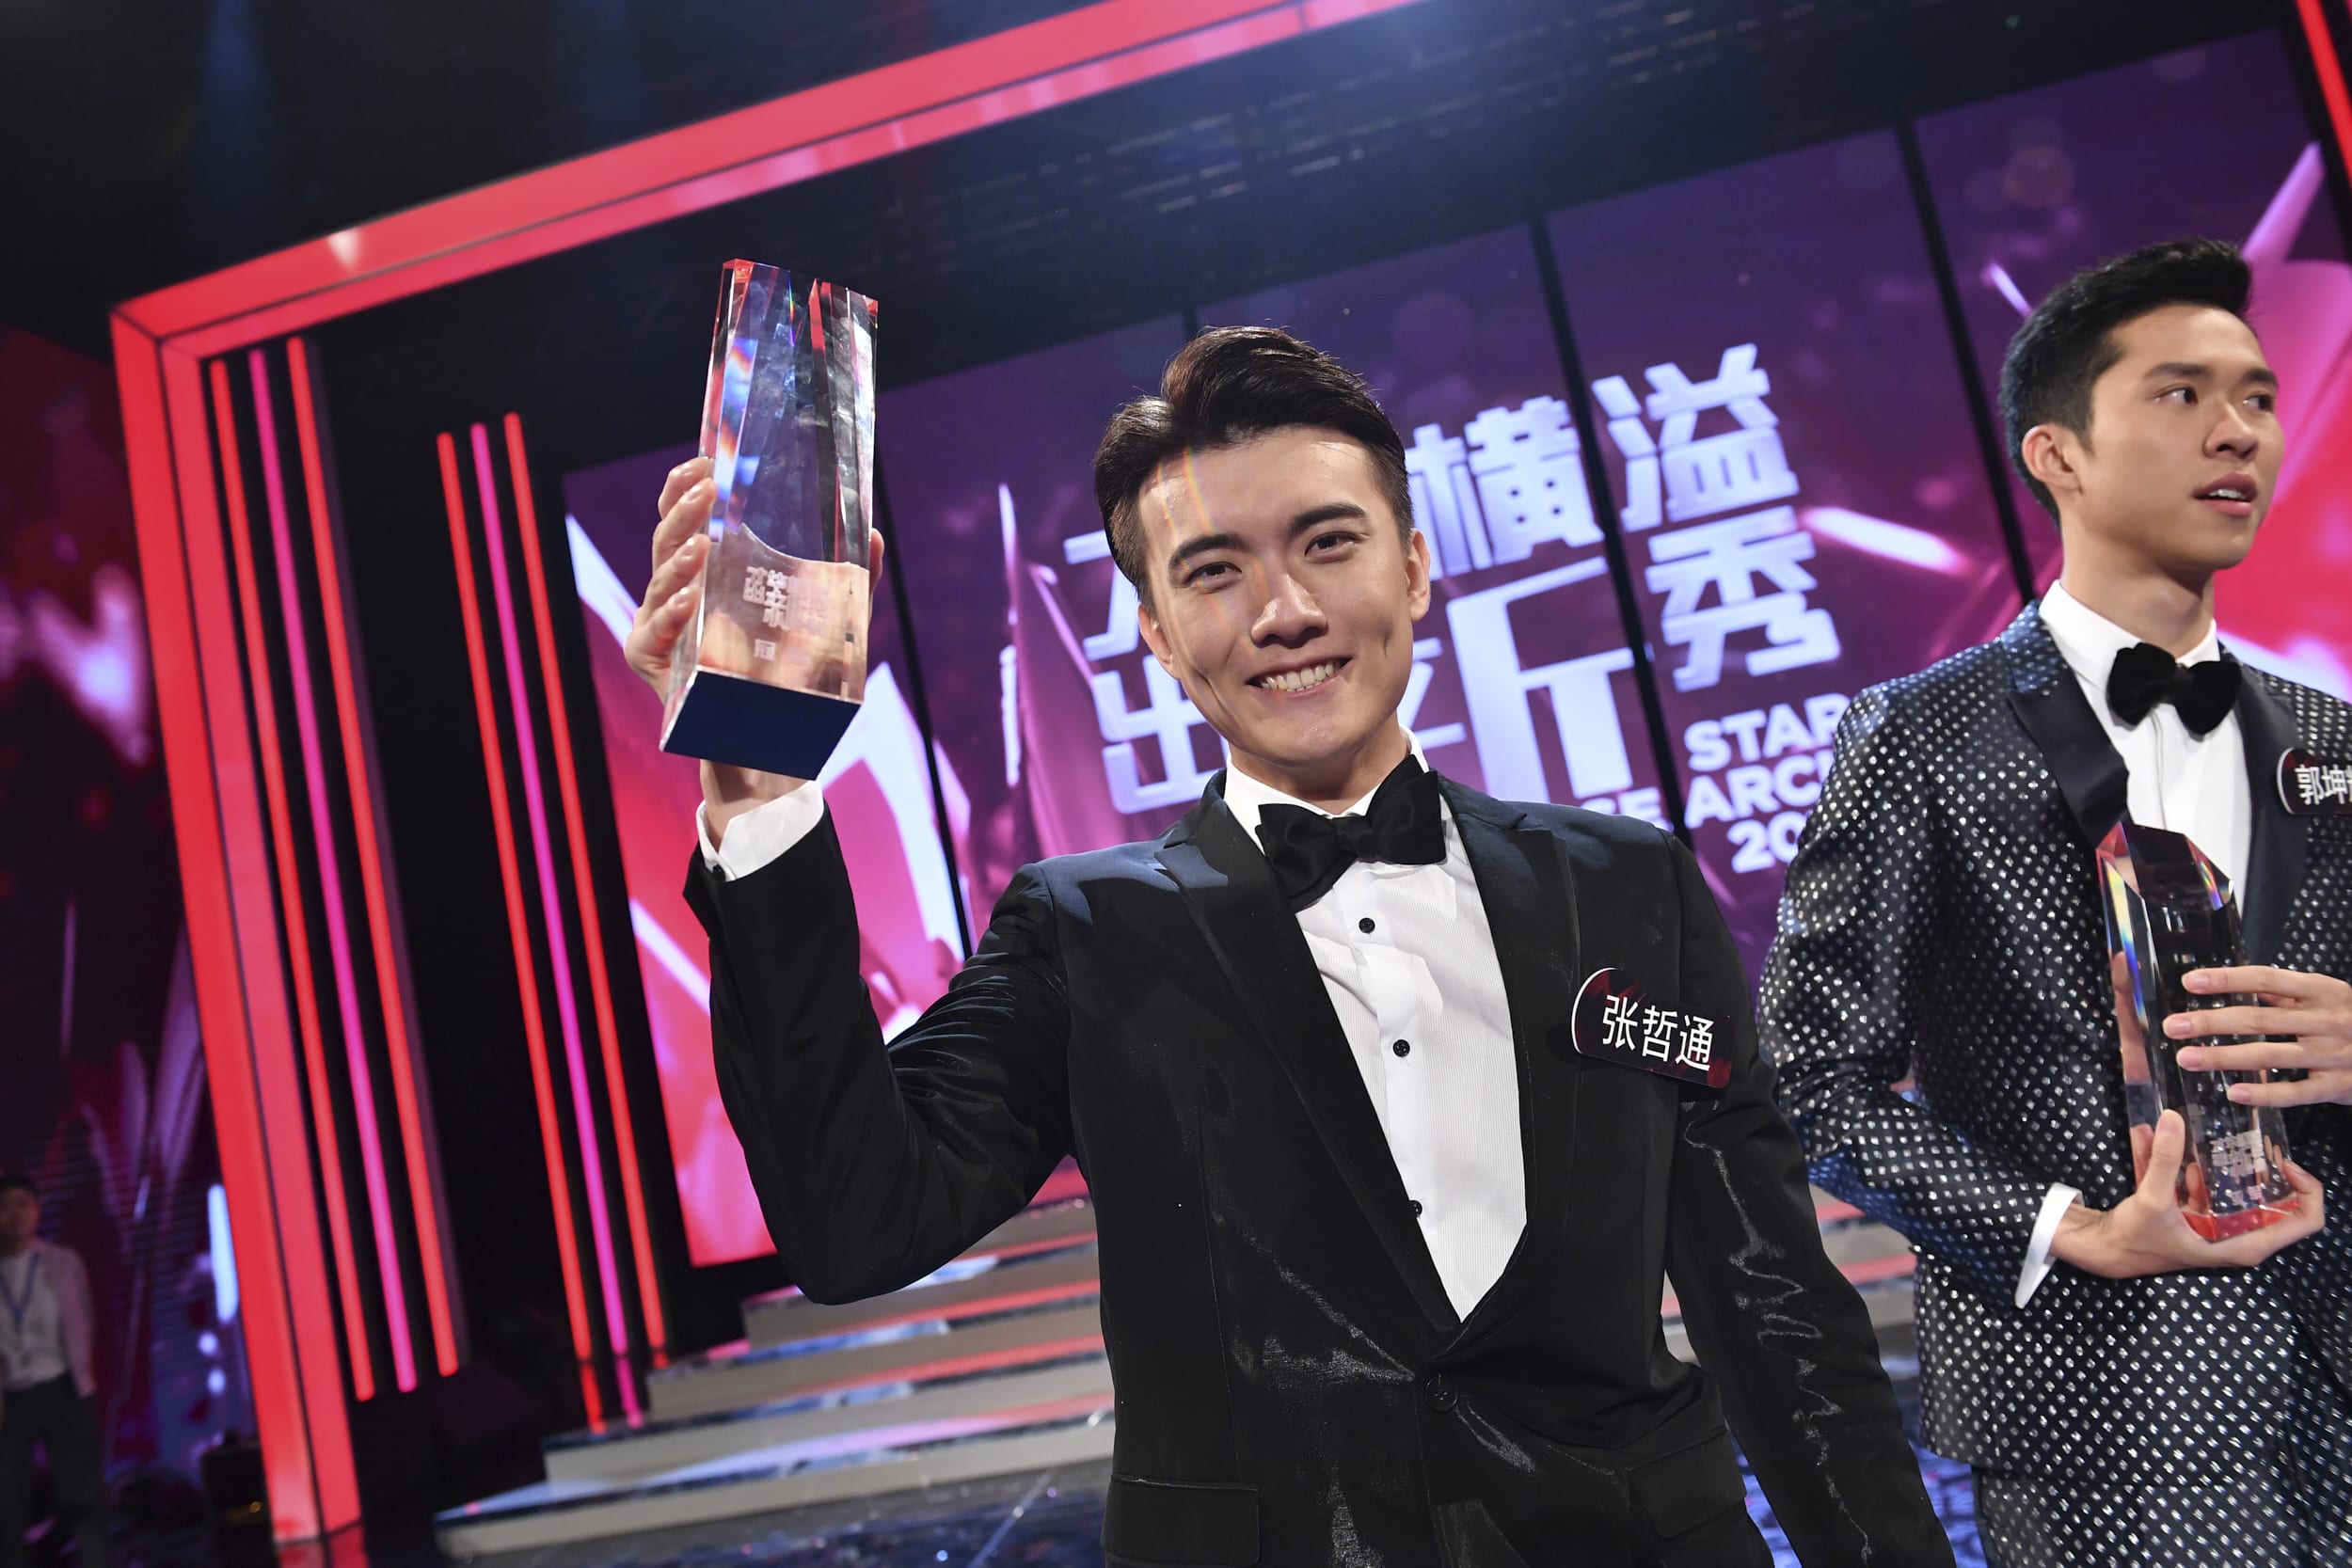 Star Search 2019 Champion Teoh Zetong Confirms He’s Quitting His Carousell Job To Act